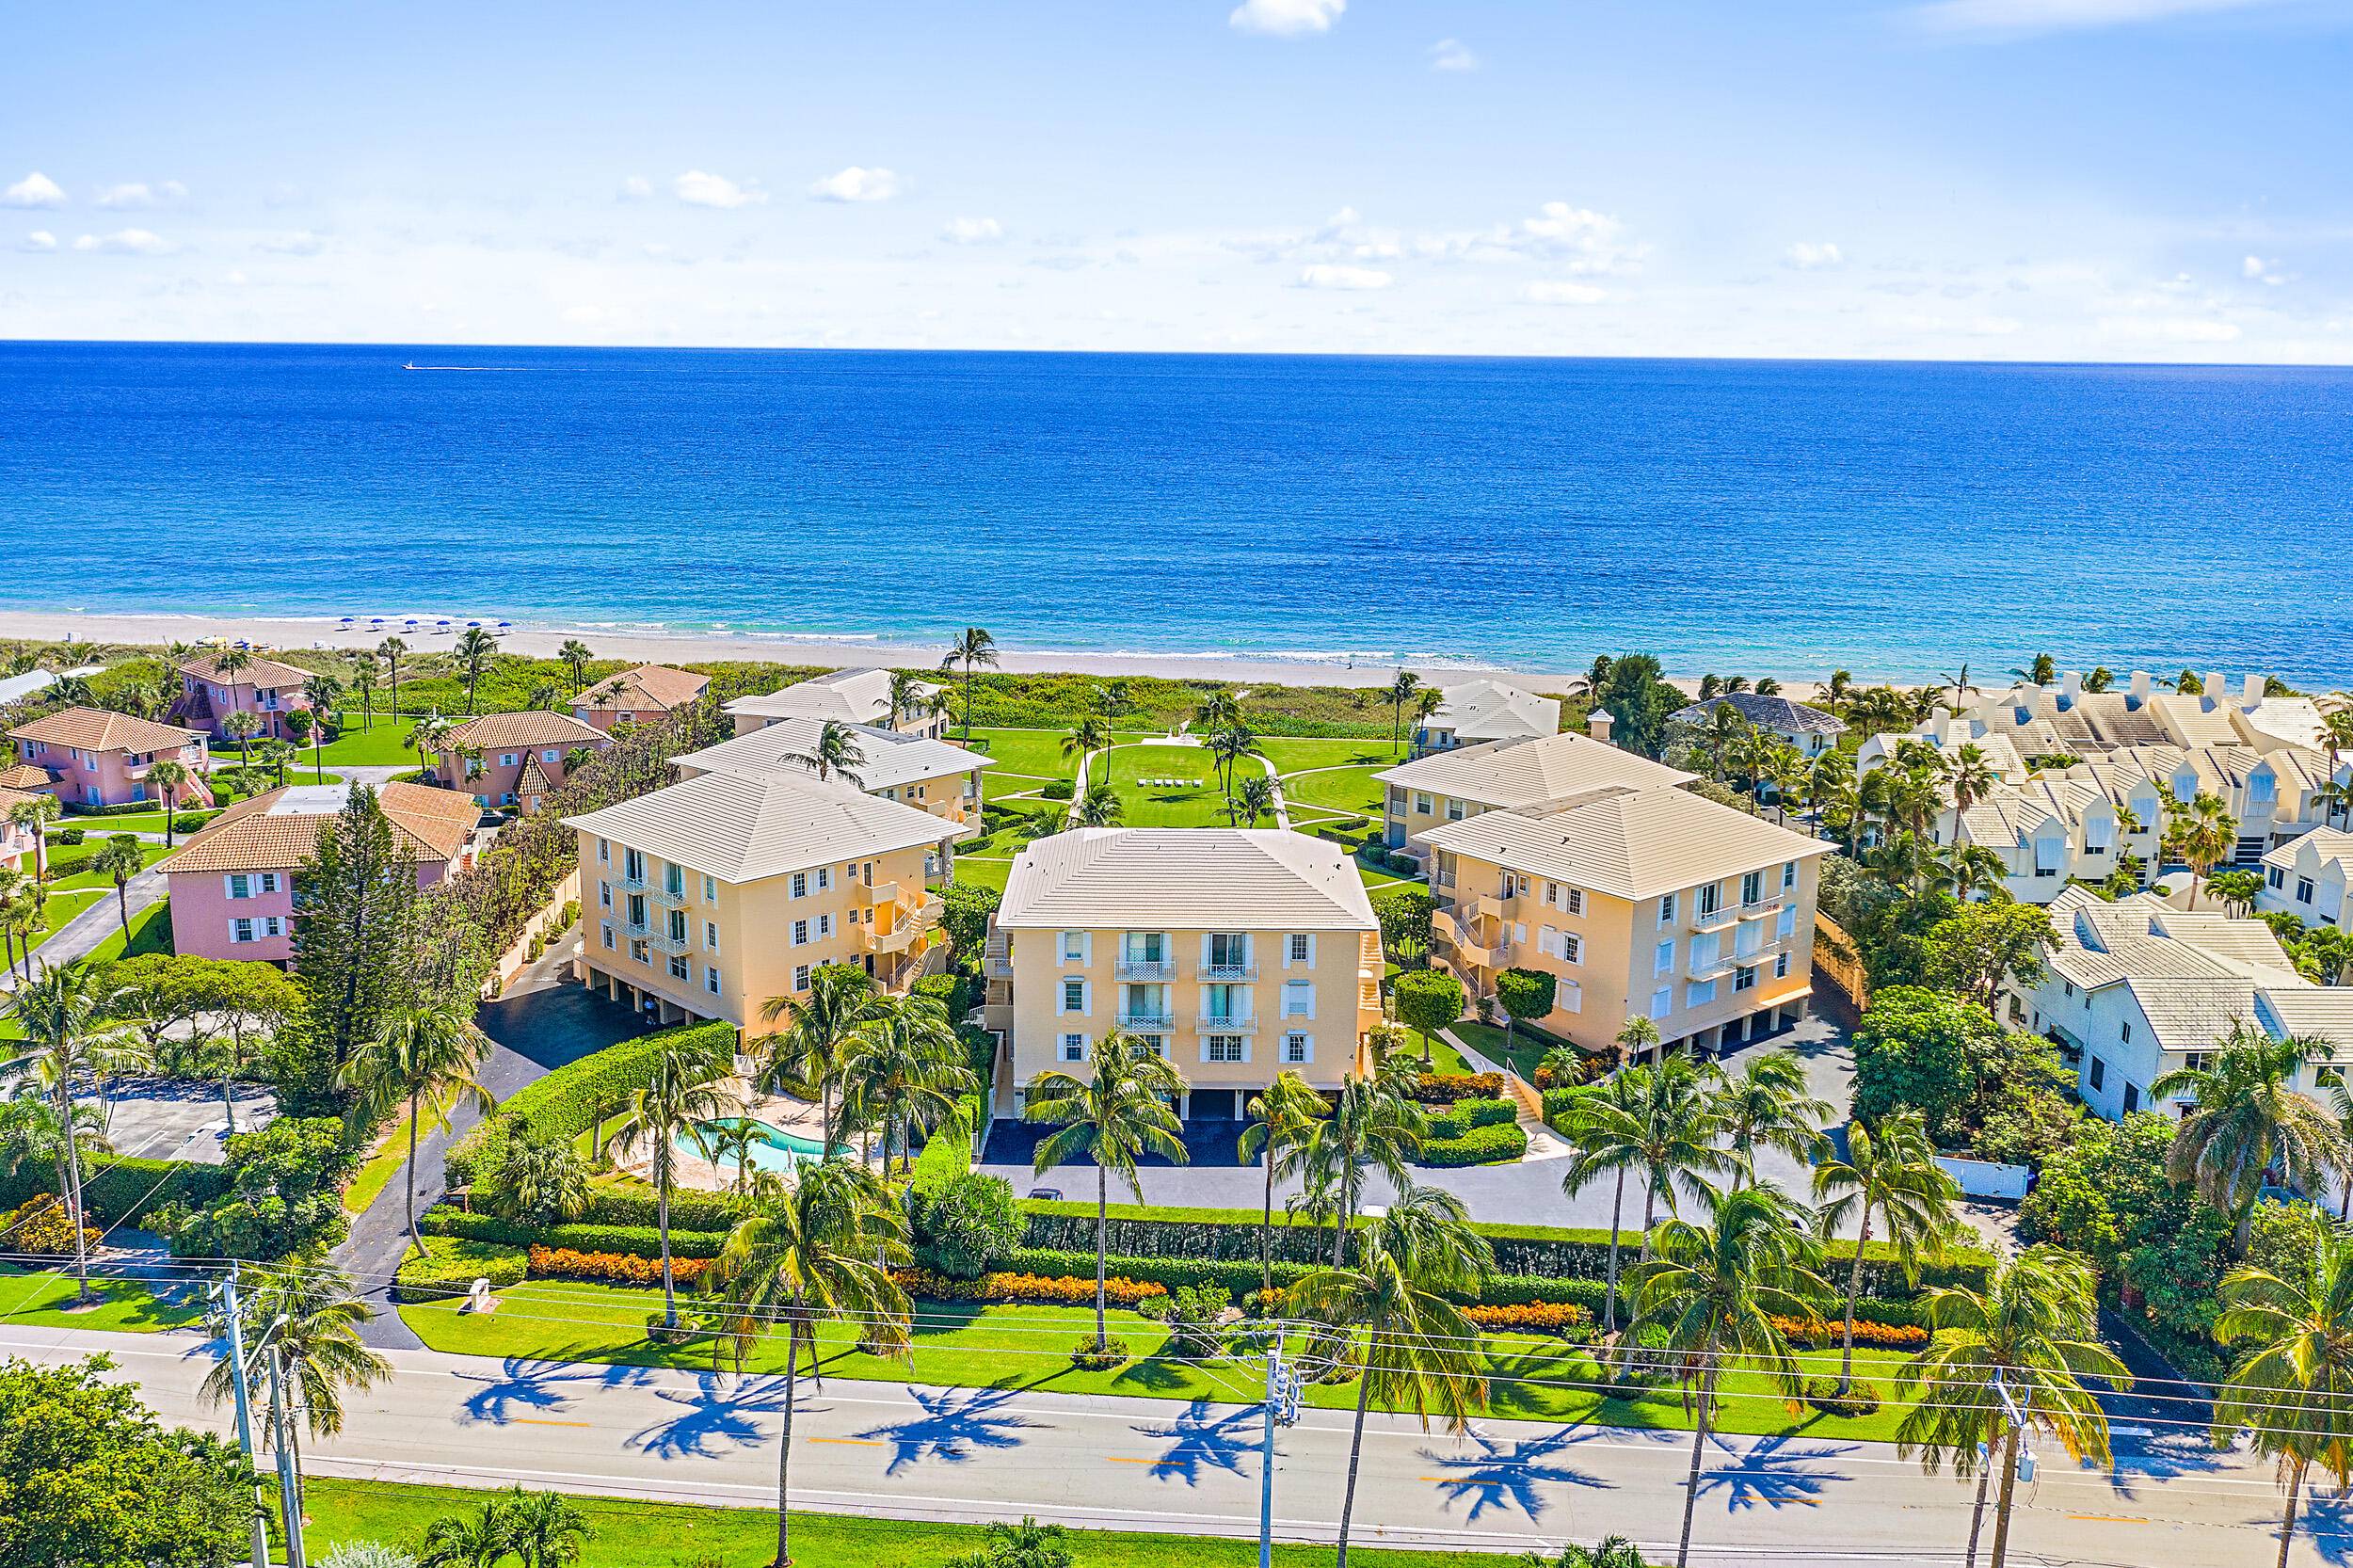 Now available for seasonal rental and or annual, this exclusive residence is oceanfront with spectacular views of the gorgeous Delray Beach shoreline.